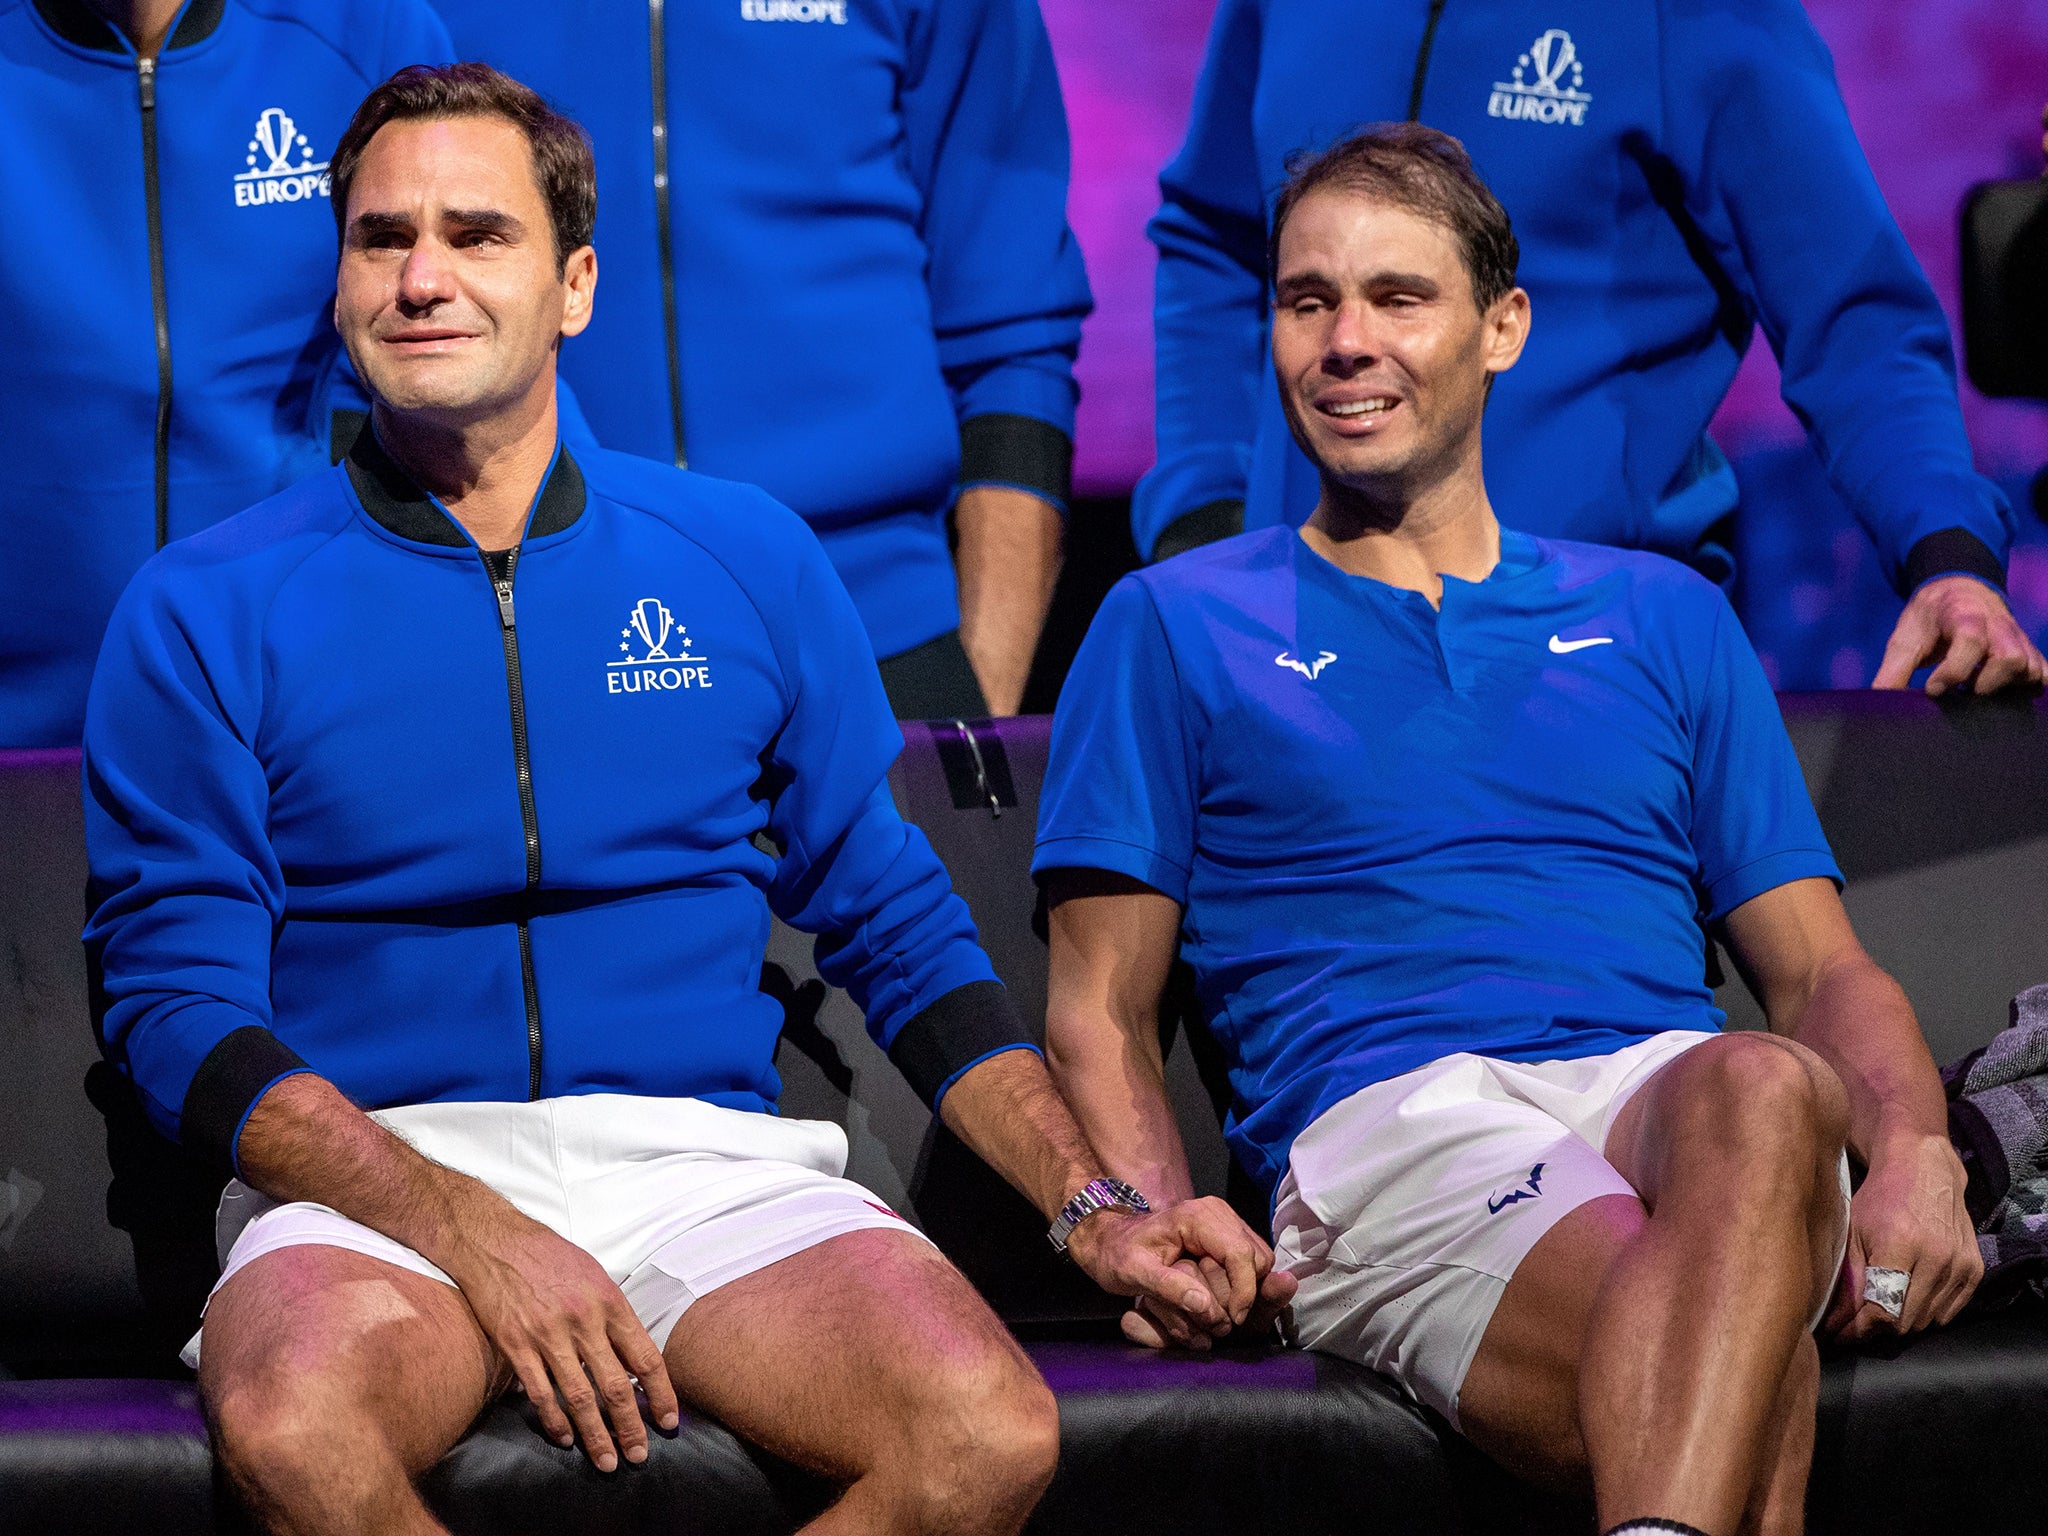 Roger Federer And Rafael Nadal Friendship Why Dont More British Men Hold Hands The Independent